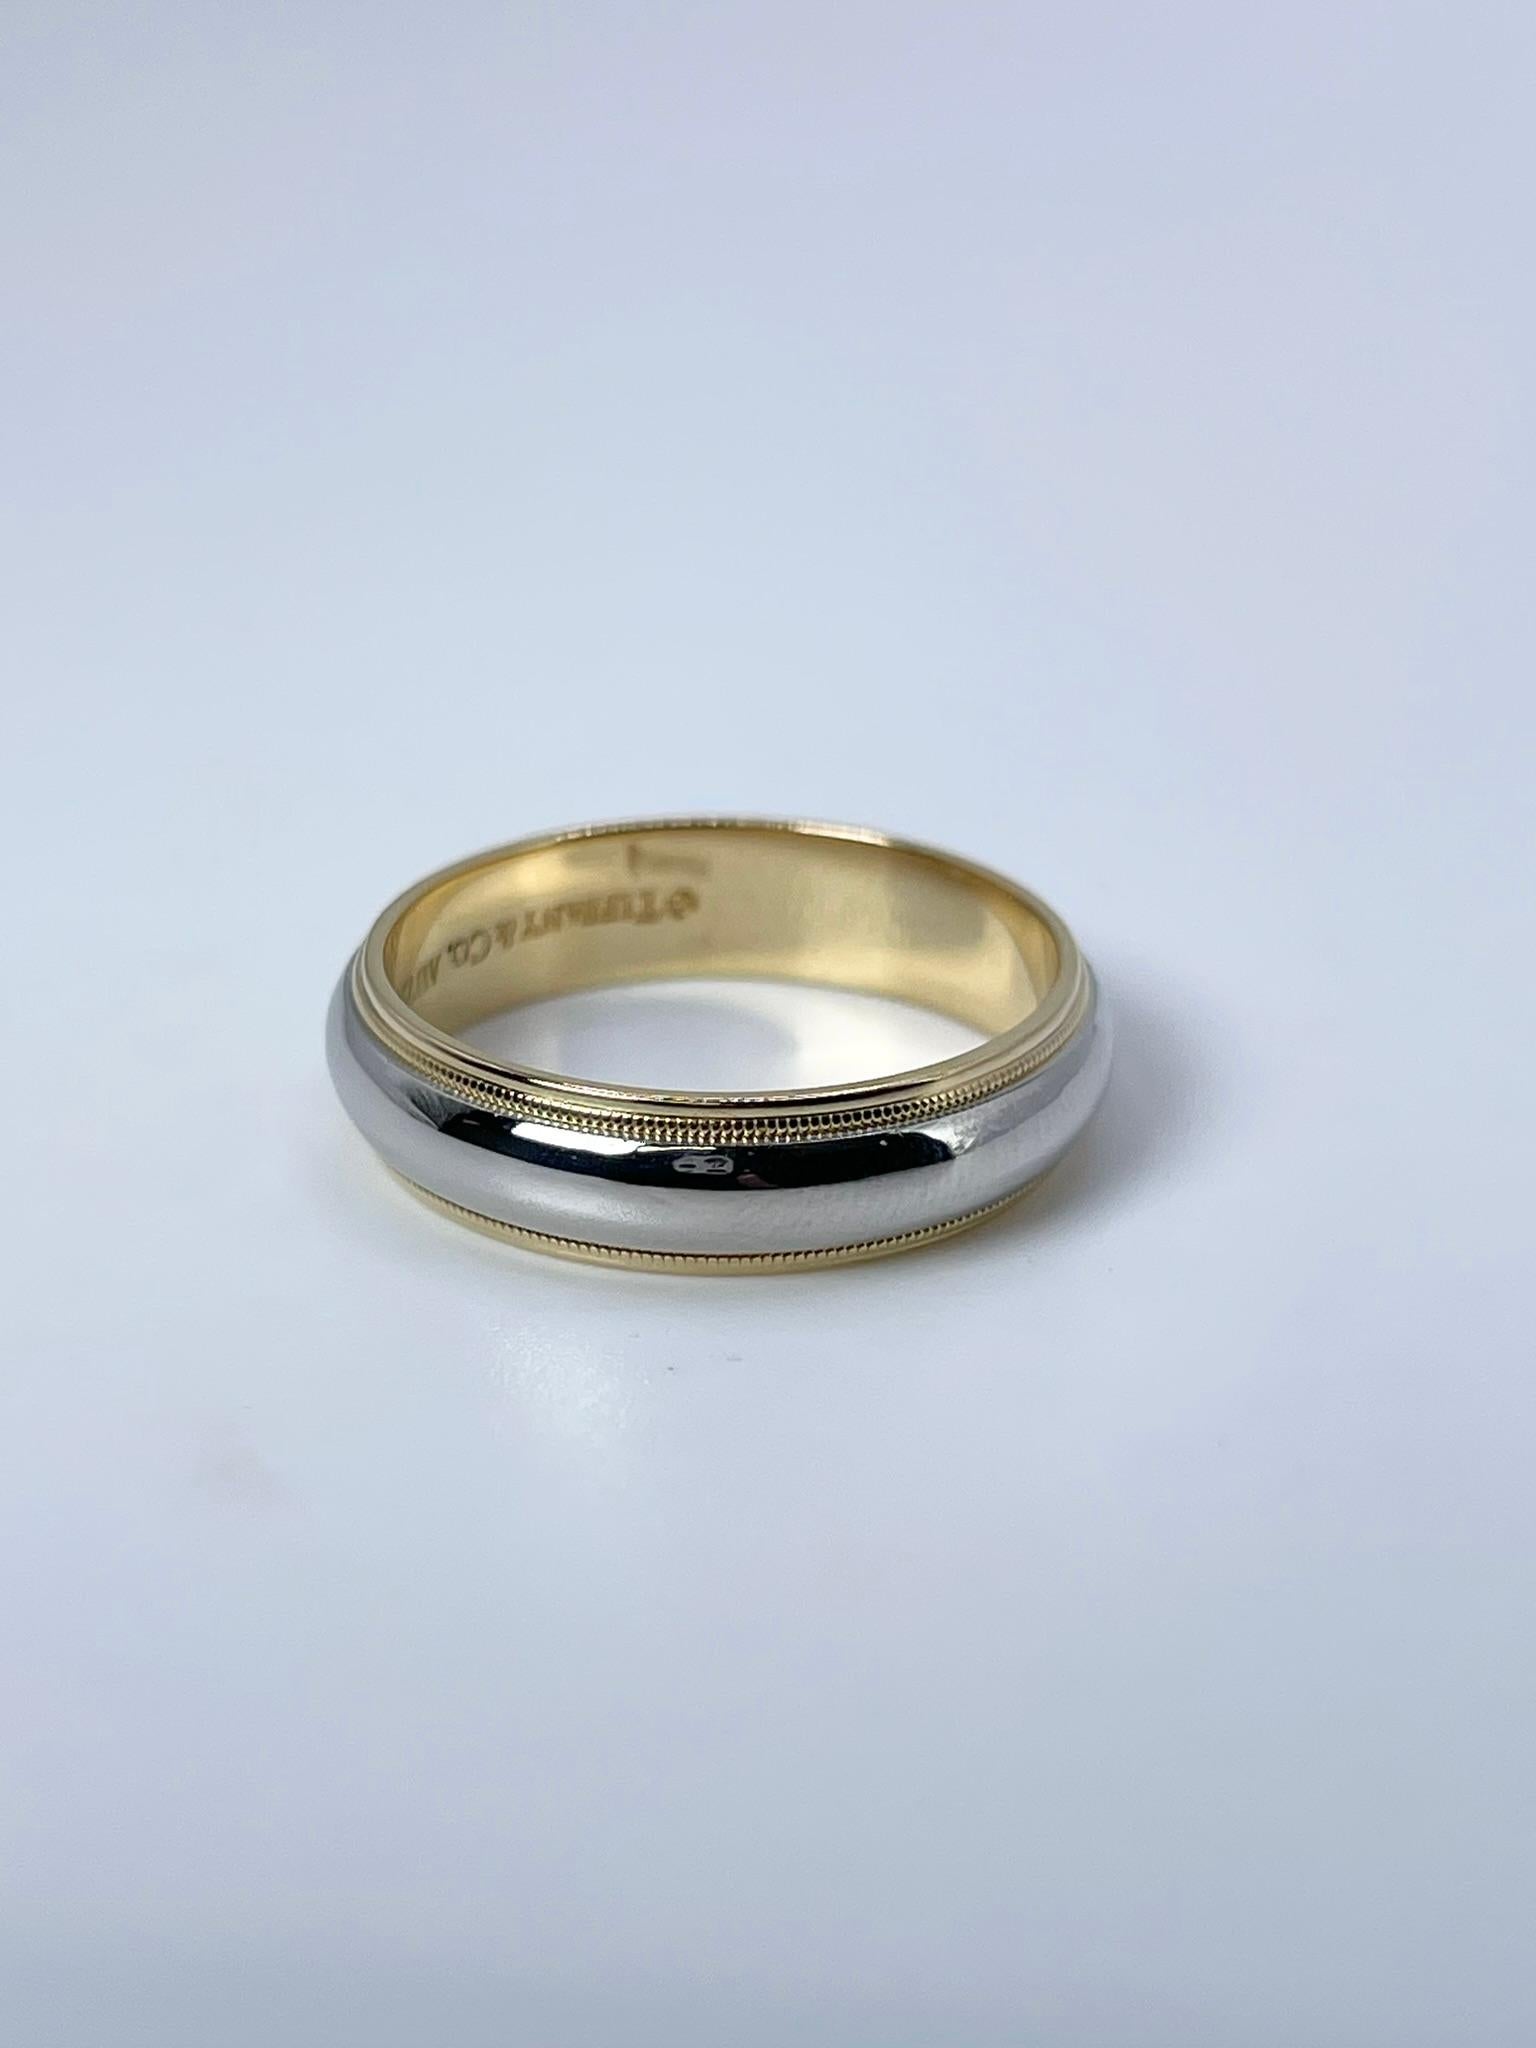 Tiffany & Co. wedding band in 18KT white and yellow gold.
ITEM: PTE 405-00002
GRAM WEIGHT: 11.73gr
GOLD: 18KT gold
SIZE: 12.5
WIDTH:6mm

WHAT YOU GET AT STAMPAR JEWELERS:
Stampar Jewelers, located in the heart of Jupiter, Florida, is a custom